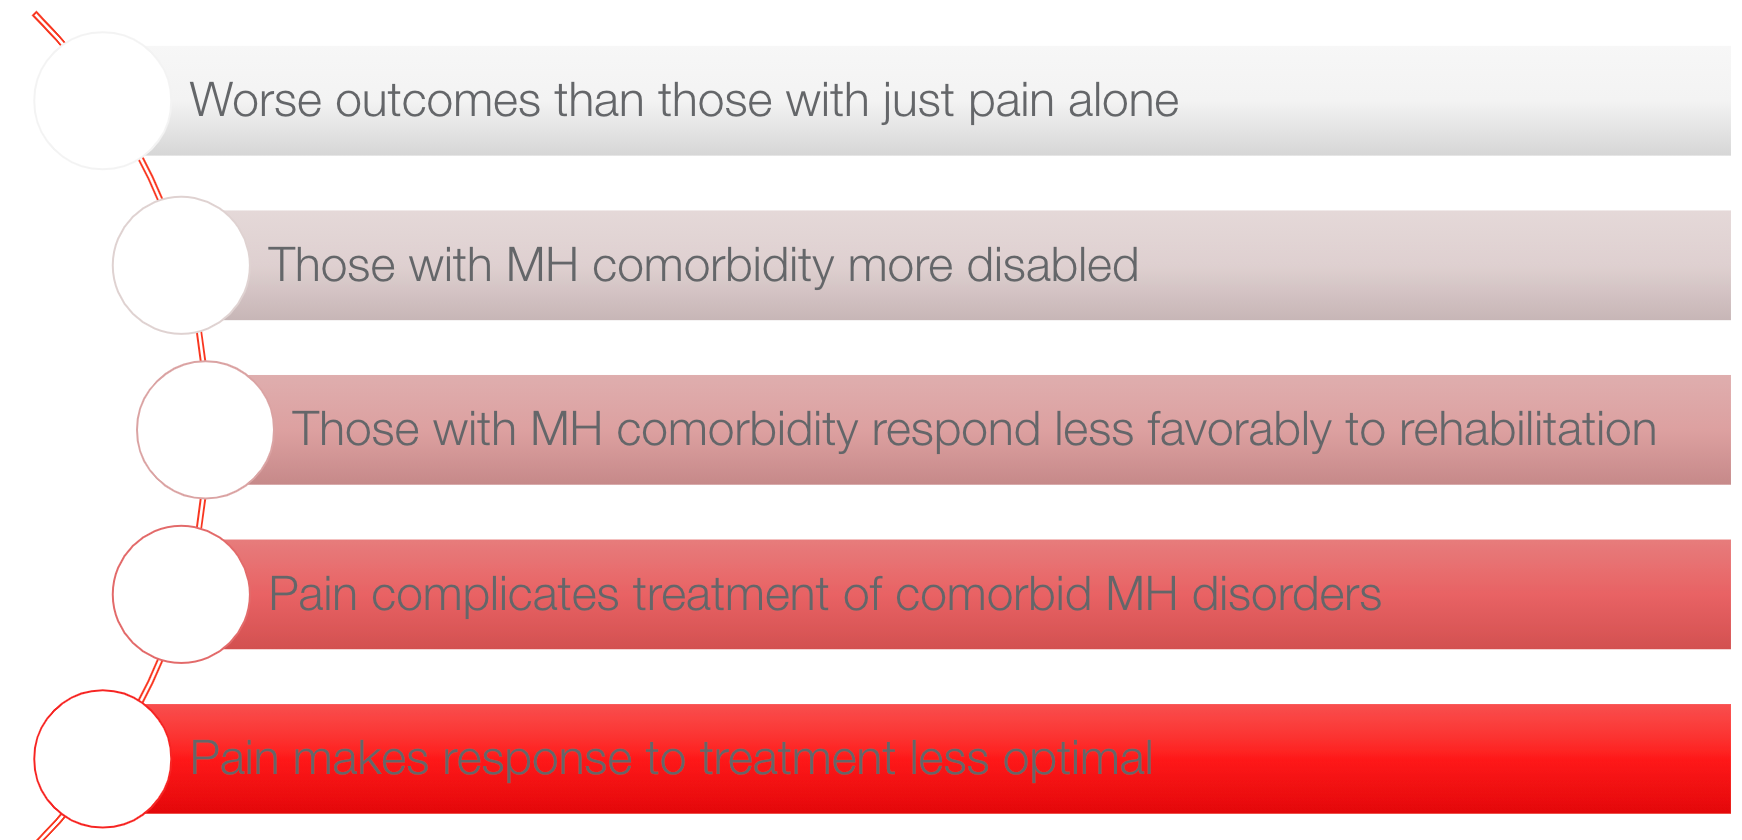 Mental health as a comorbidity with pain